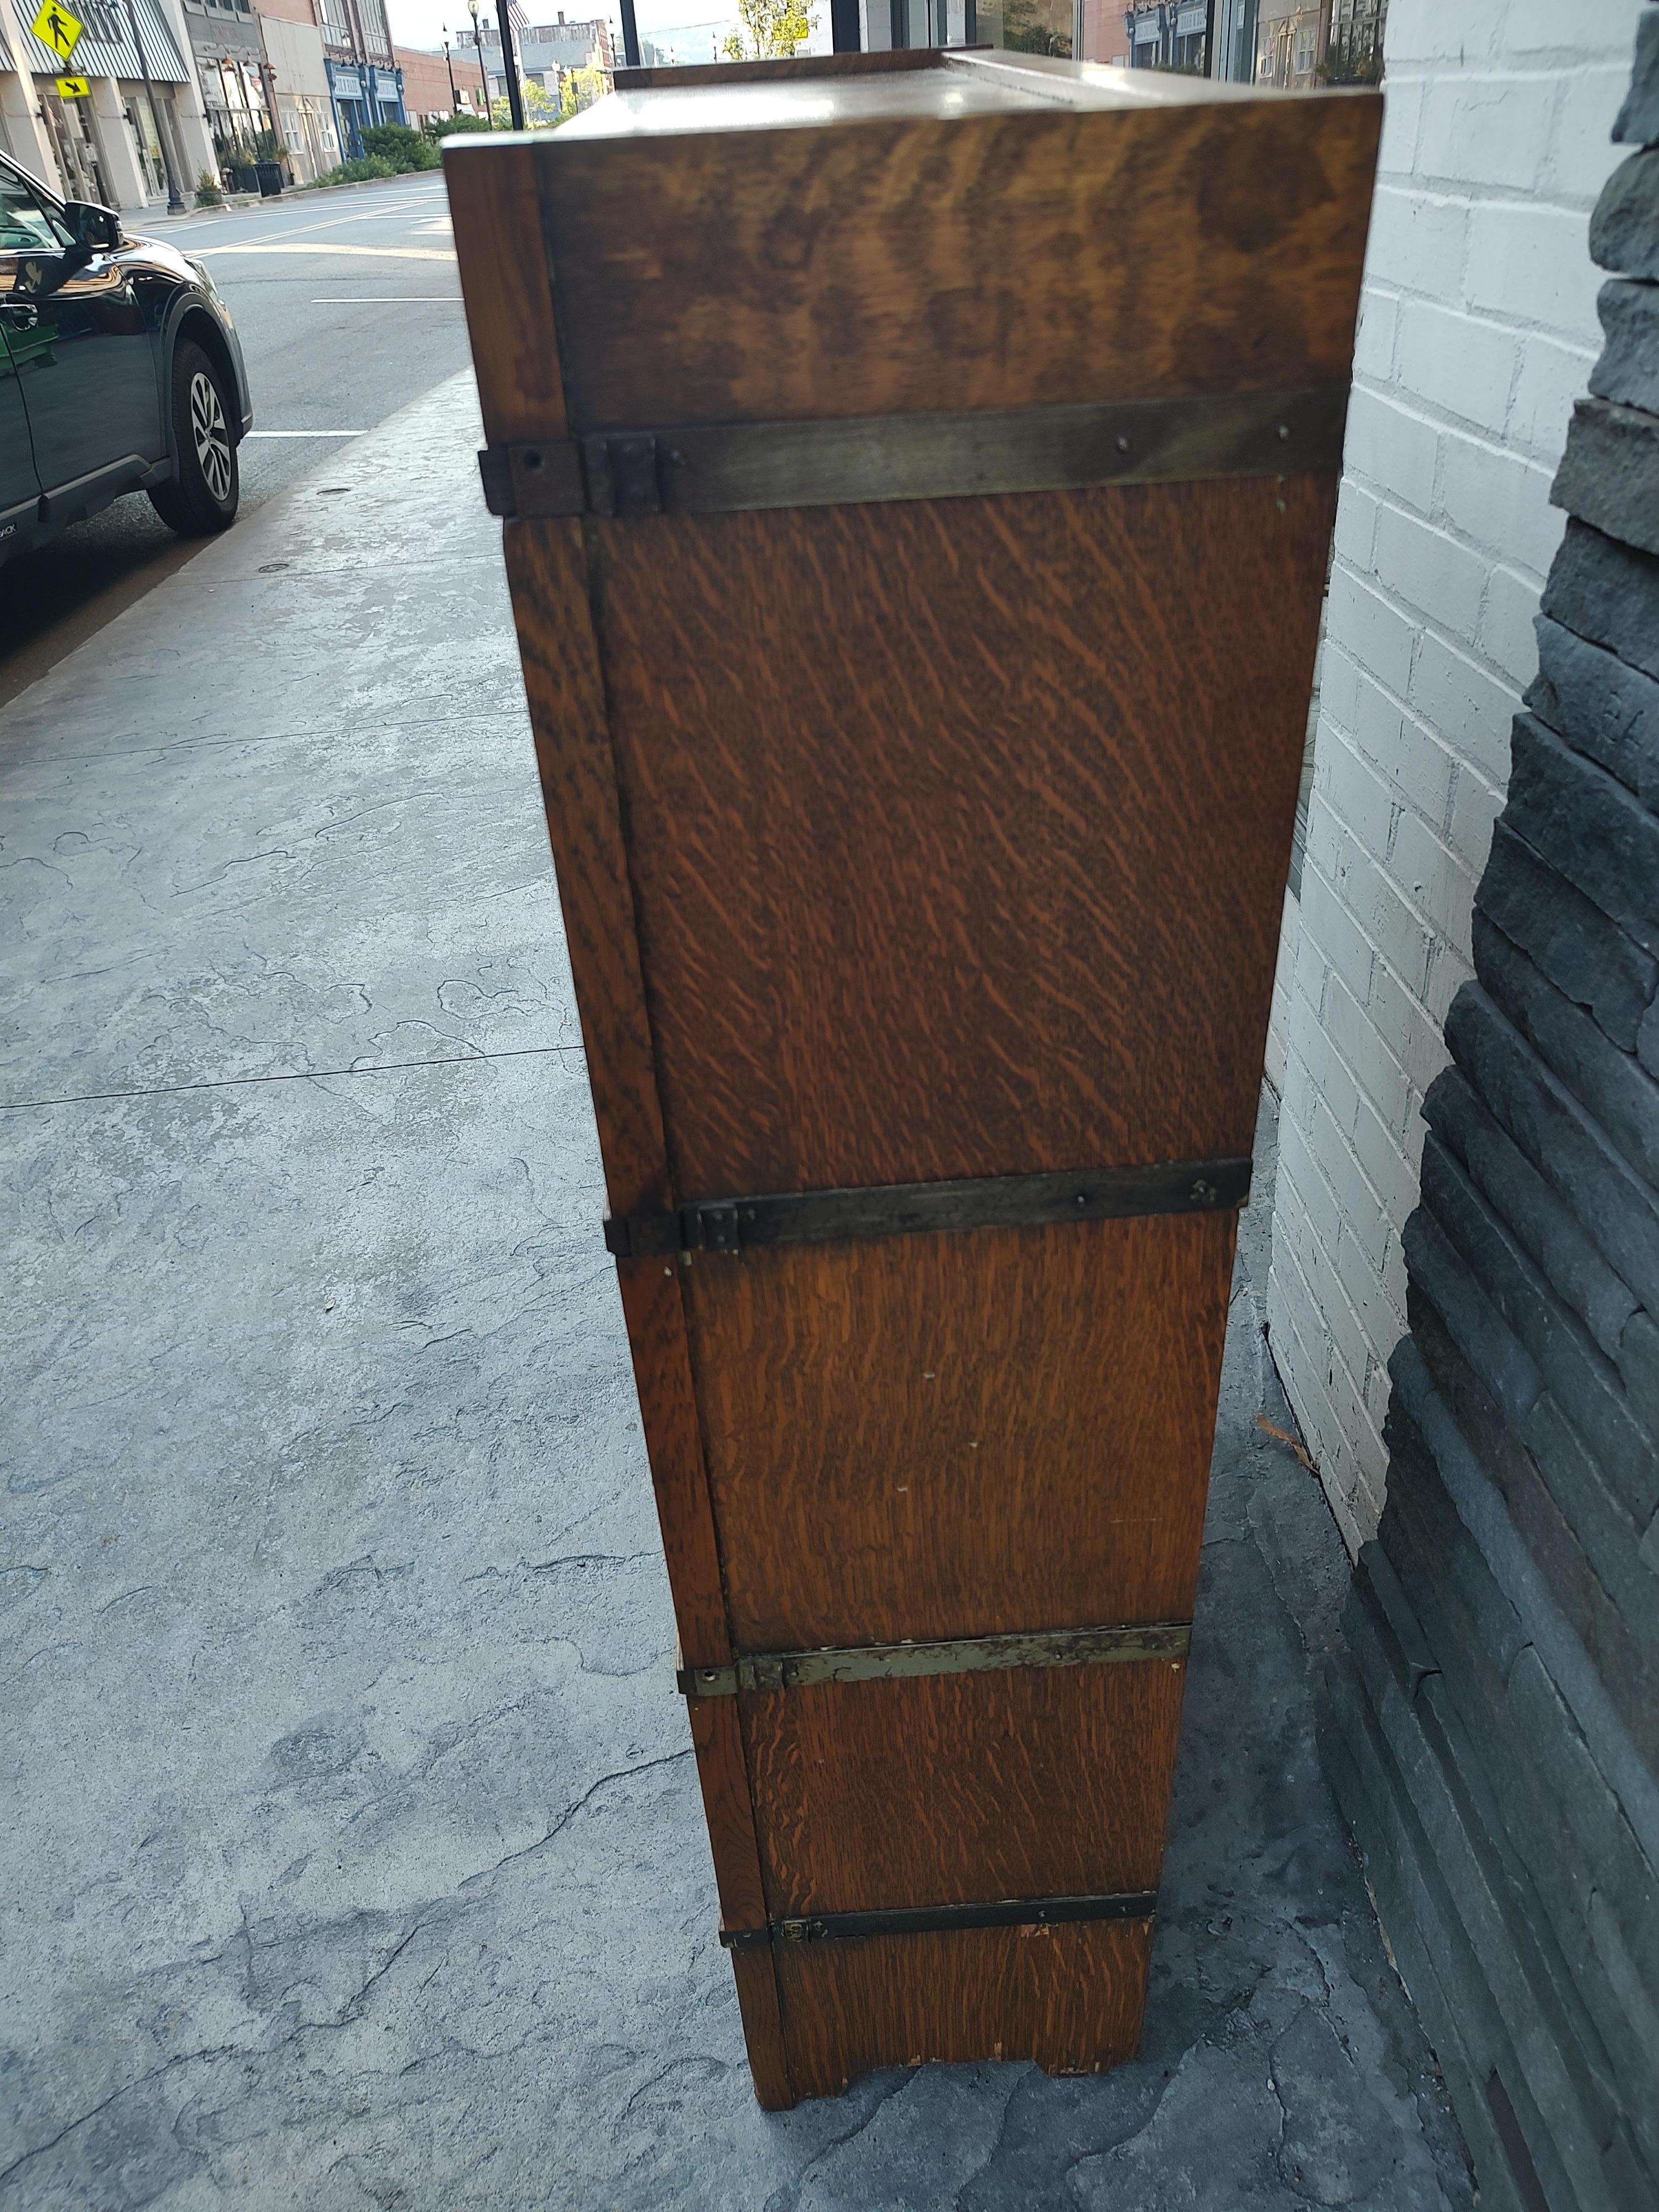 Mission Art's & Crafts 5 Section Leaded Door Bookcase by Globe Wernicke In Good Condition For Sale In Port Jervis, NY